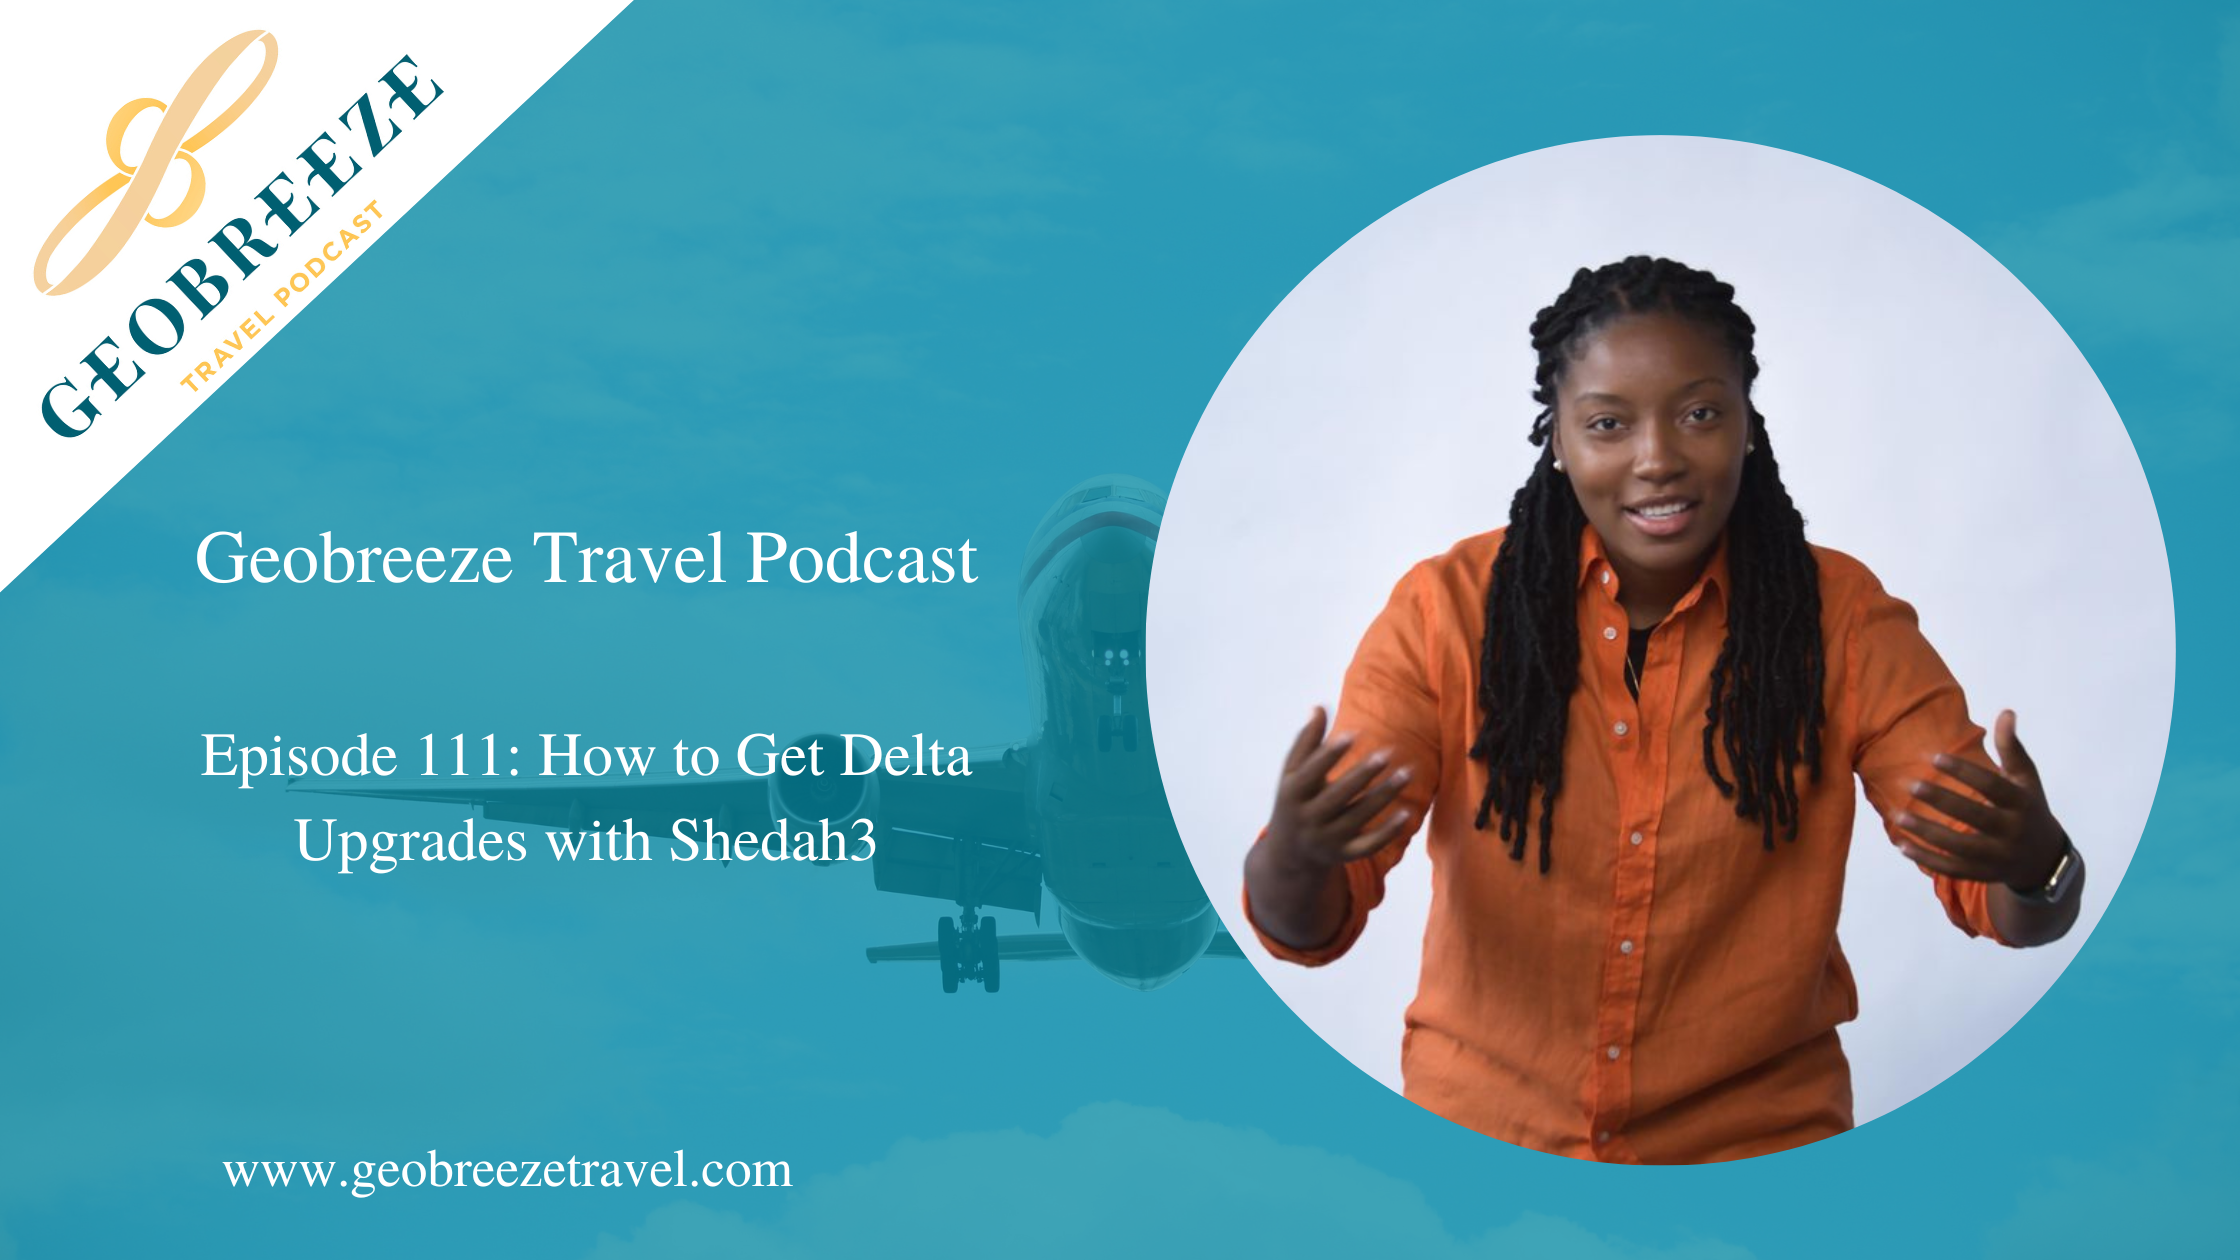 Episode 111: How to Get Delta Upgrades with Shedah3